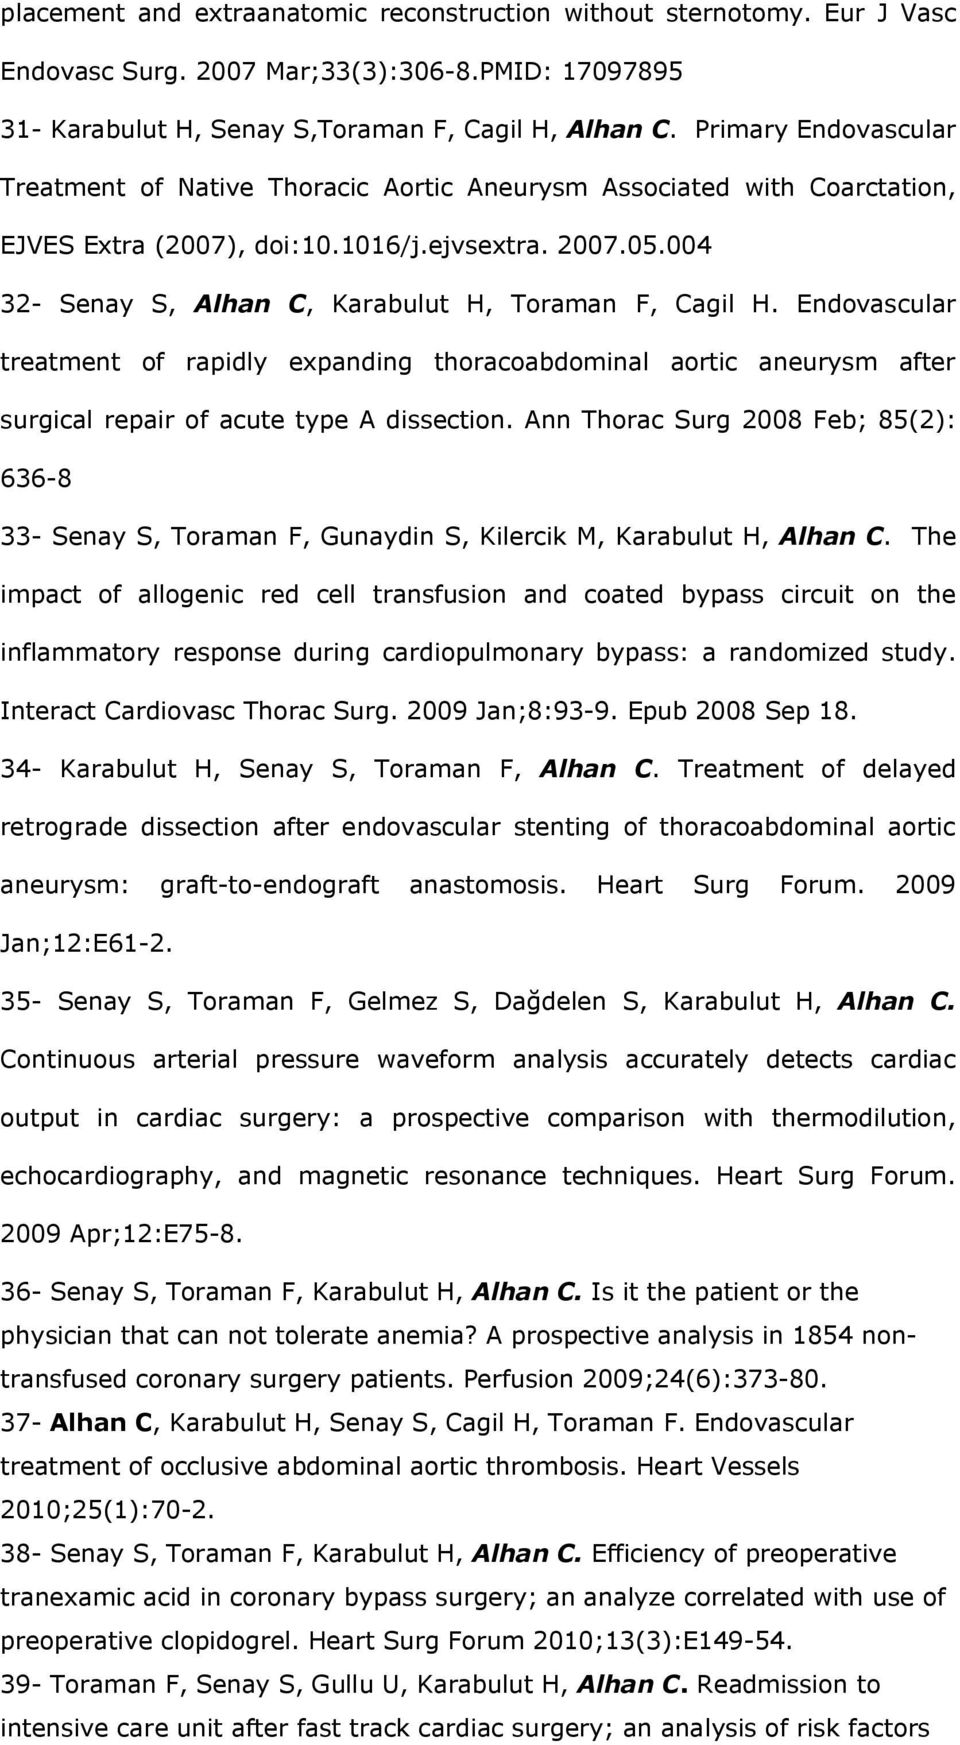 004 32- Senay S, Alhan C, Karabulut H, Toraman F, Cagil H. Endovascular treatment of rapidly expanding thoracoabdominal aortic aneurysm after surgical repair of acute type A dissection.